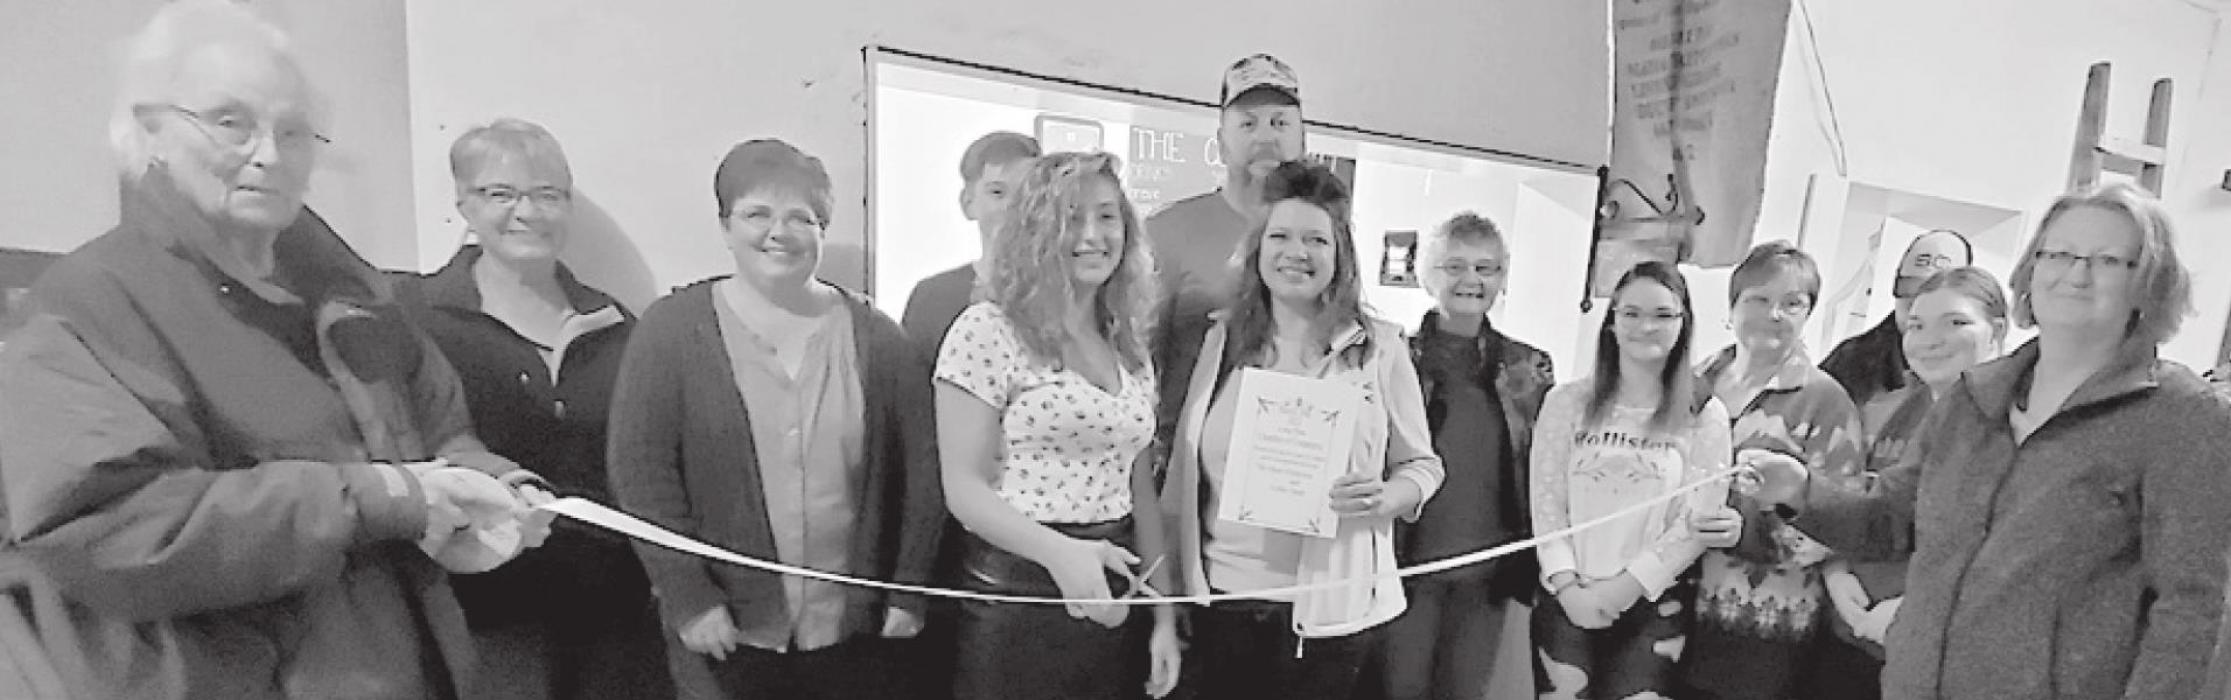 Long Pine Chamber of Commerce Holds Ribbon Cuttings for Coffee Vault and The Mane Attraction